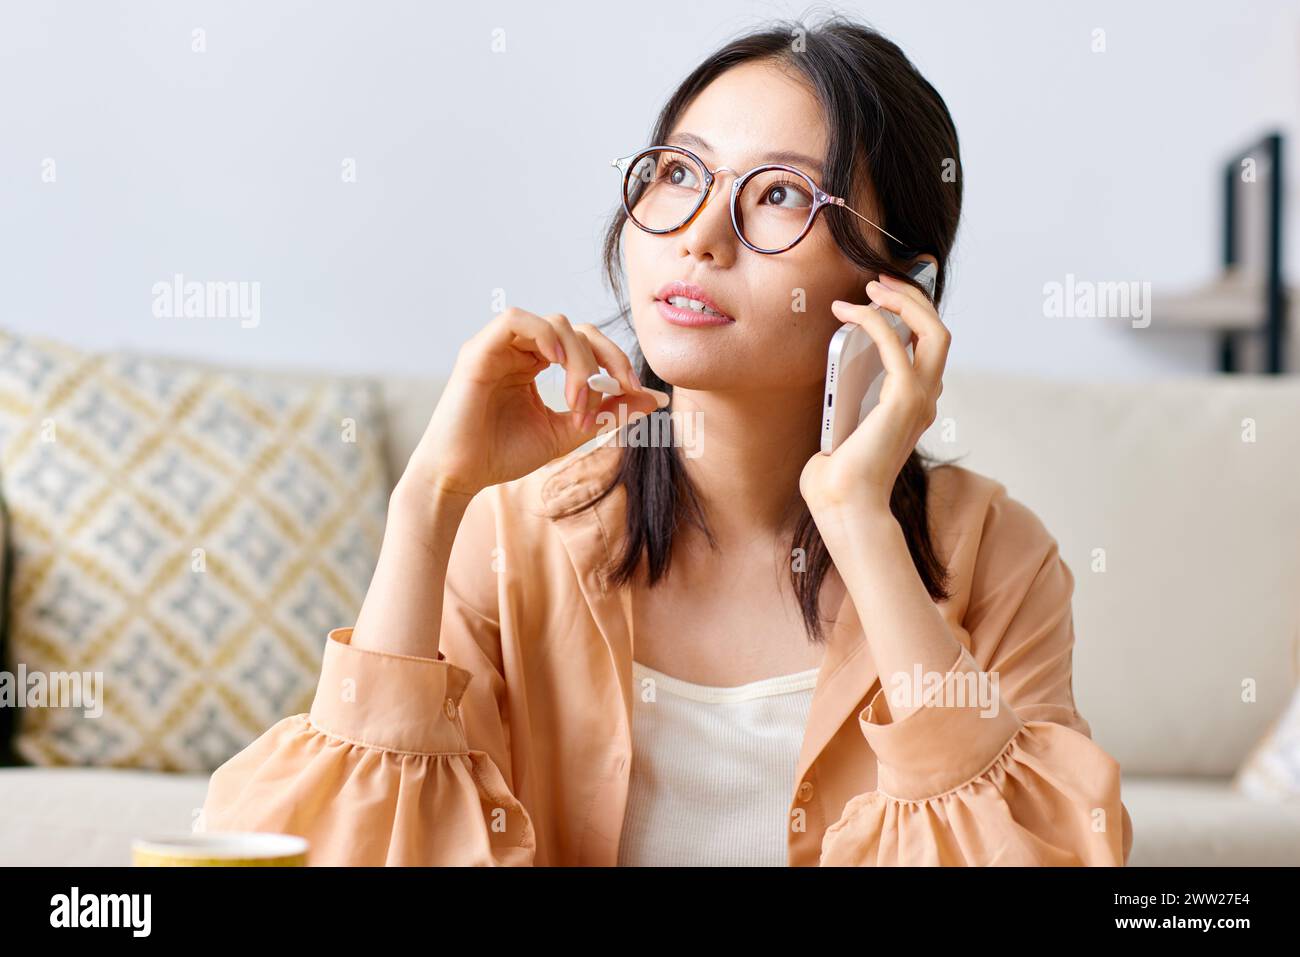 A woman in glasses talking on the phone Stock Photo